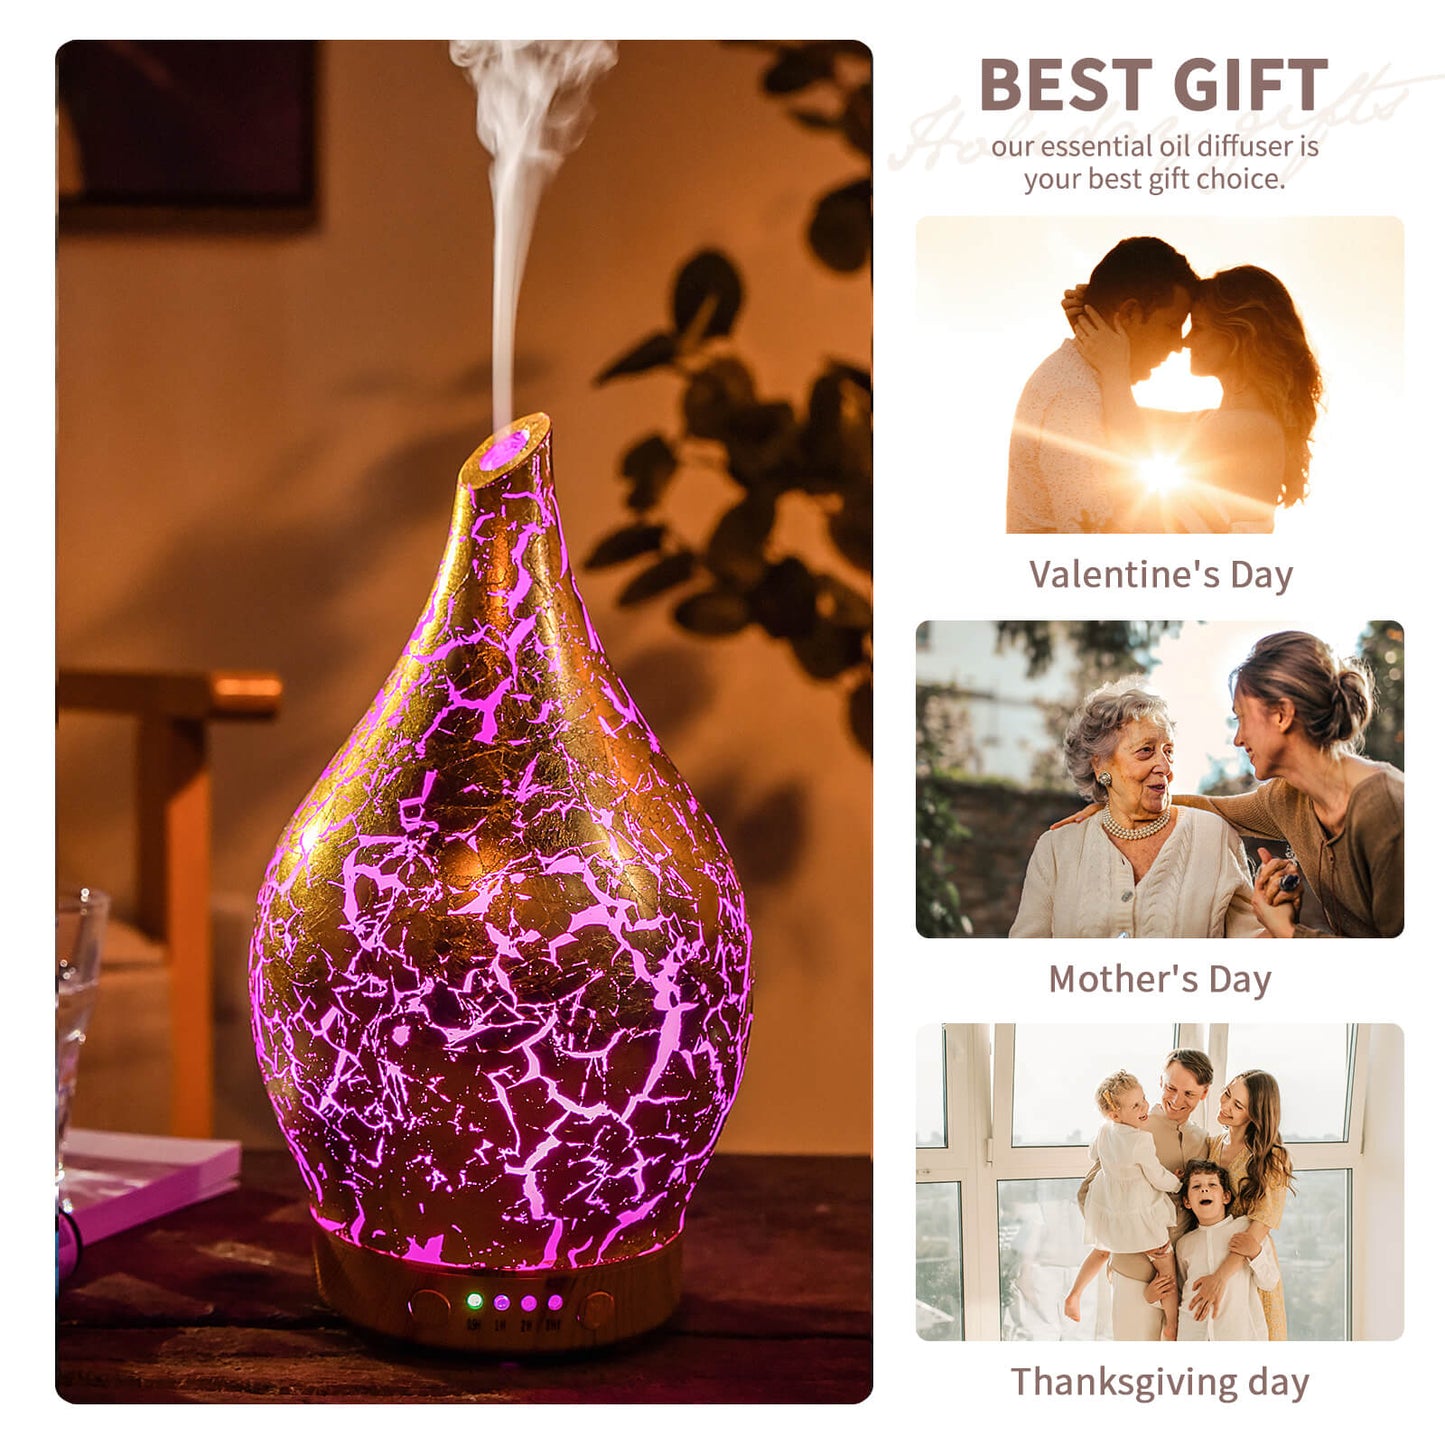 Essential Oil Diffuser Aromatherapy Diffusers for Therapeutic Oils - Ultrasonic Vase Cover & Elegant Gold Color- Air Humidifier for Sleep,Work,Study,Read,Yoga,Spa